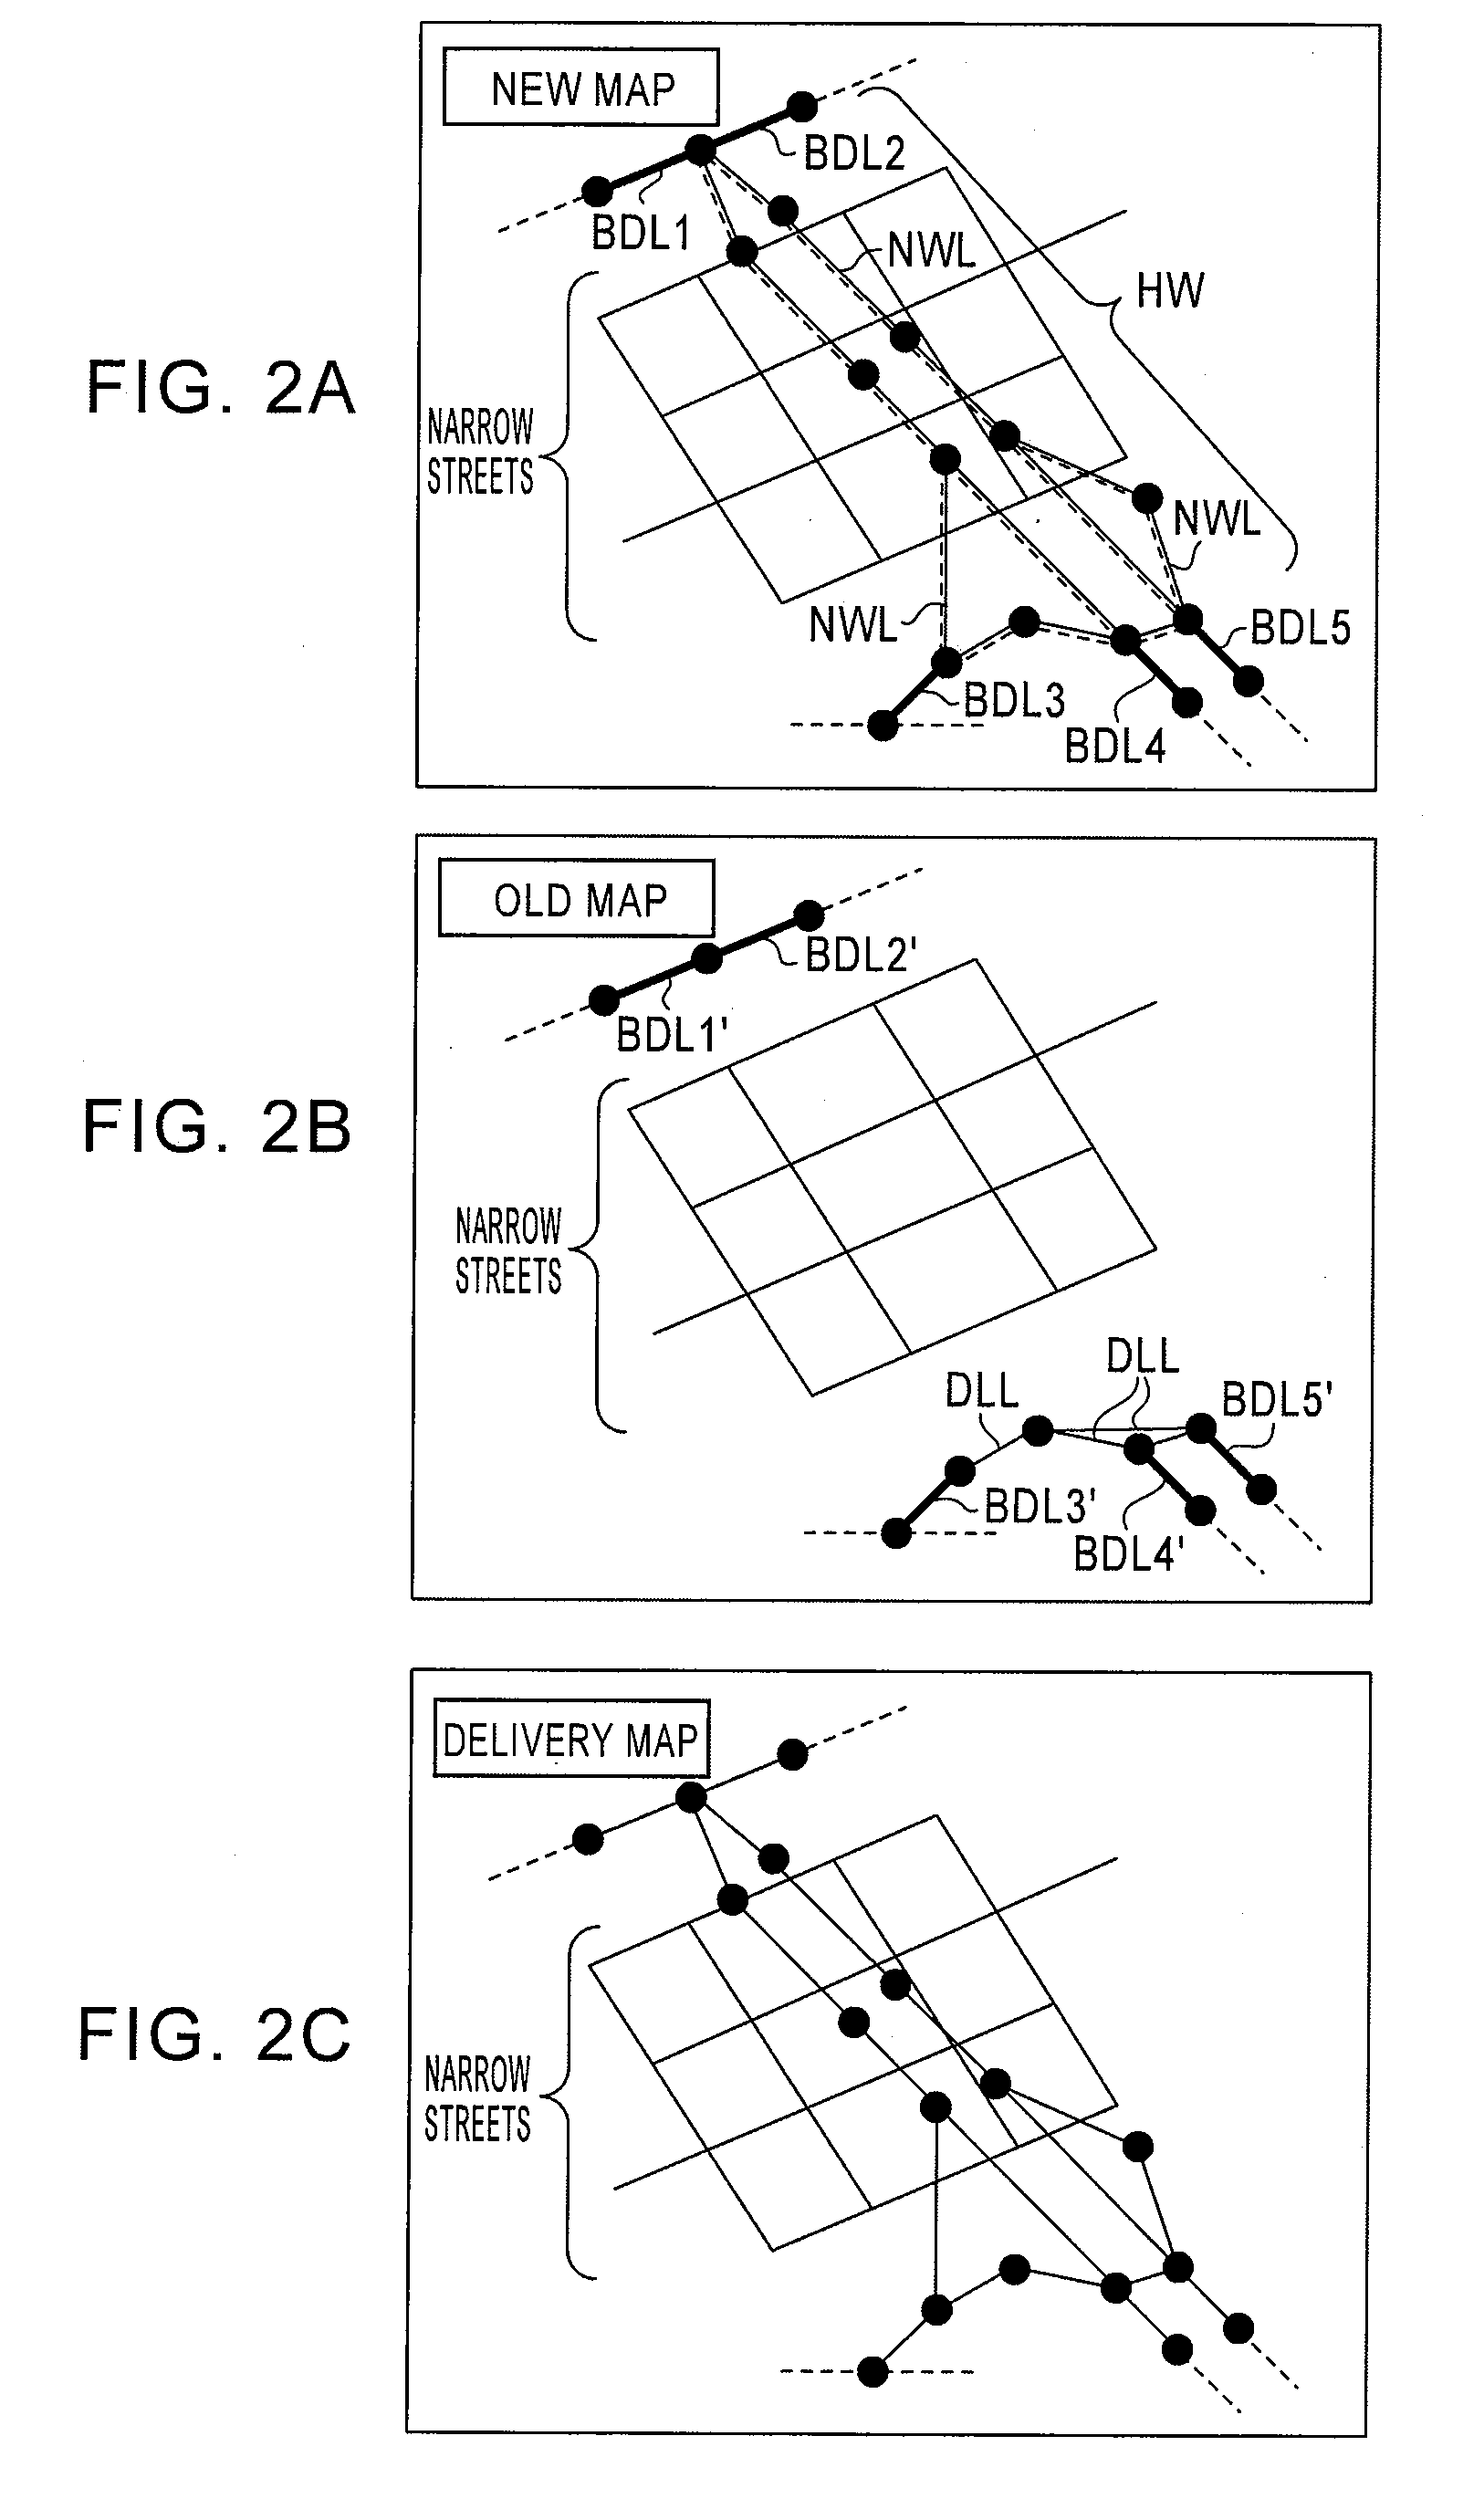 Delivery map creation method and device and differential data creation method and device